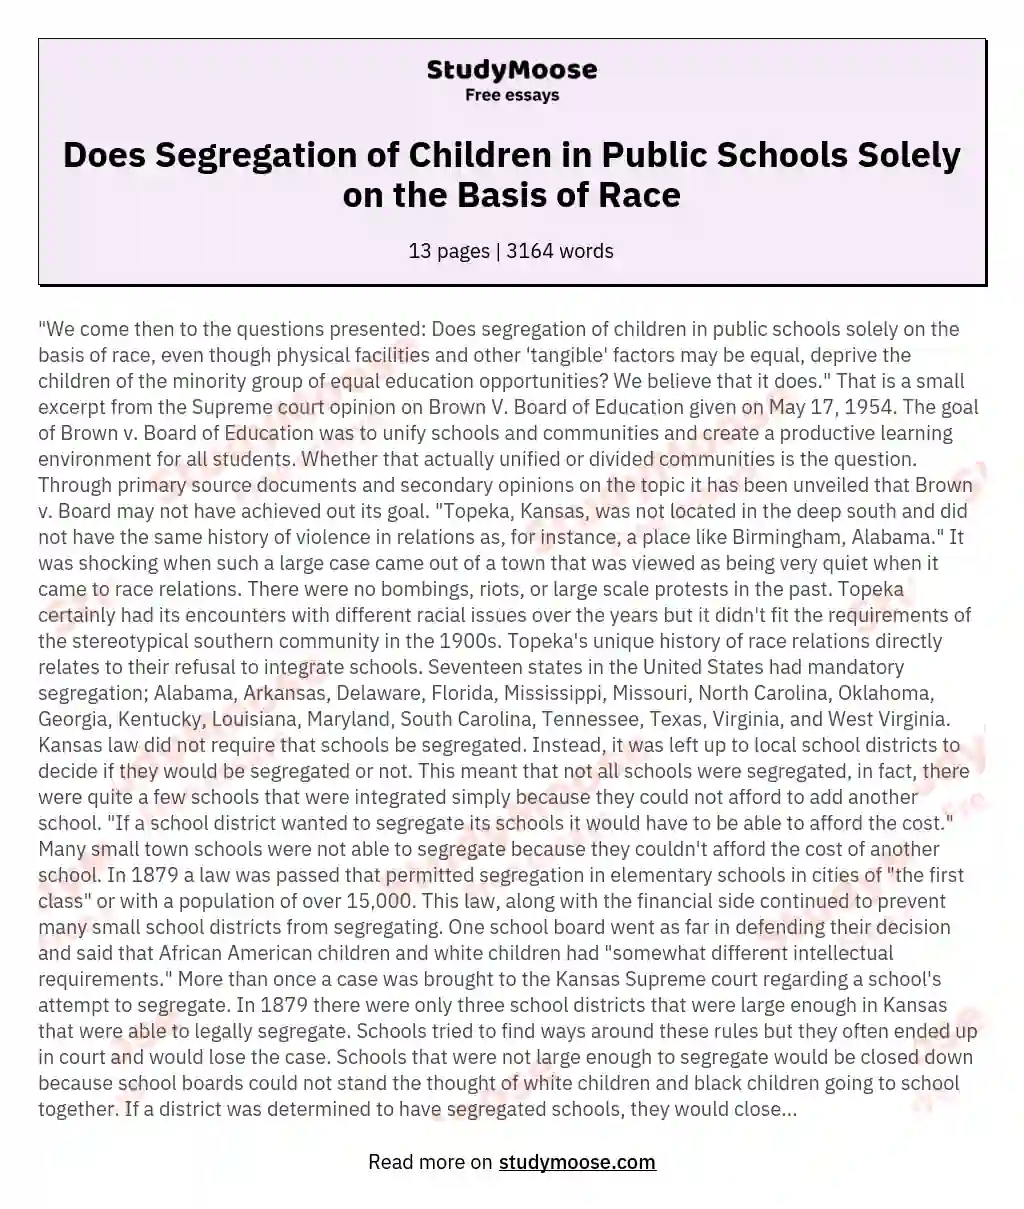 Does Segregation of Children in Public Schools Solely on the Basis of Race